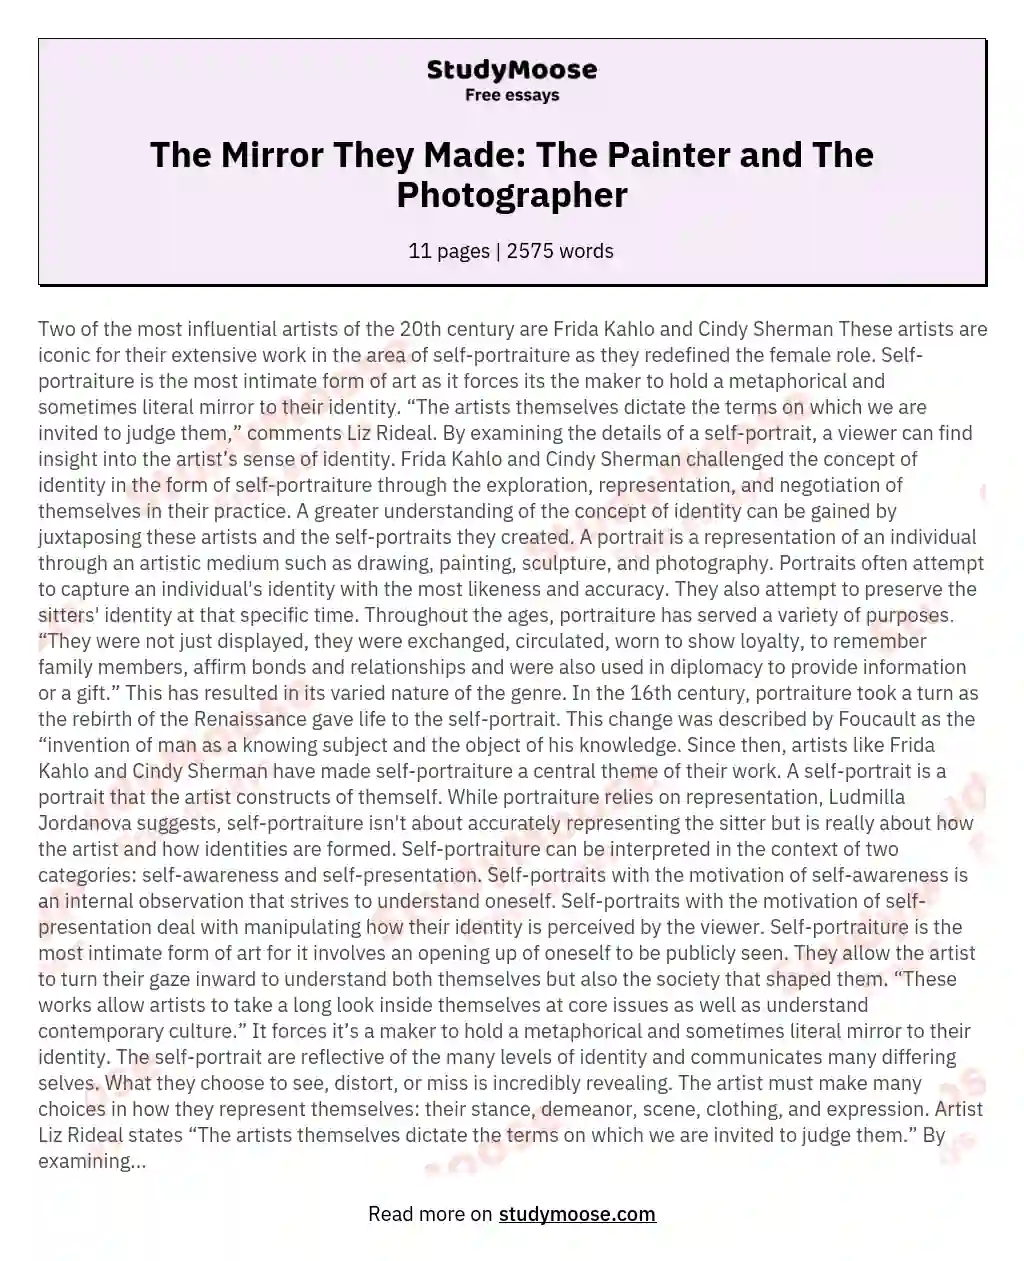 The Mirror They Made: The Painter and The Photographer